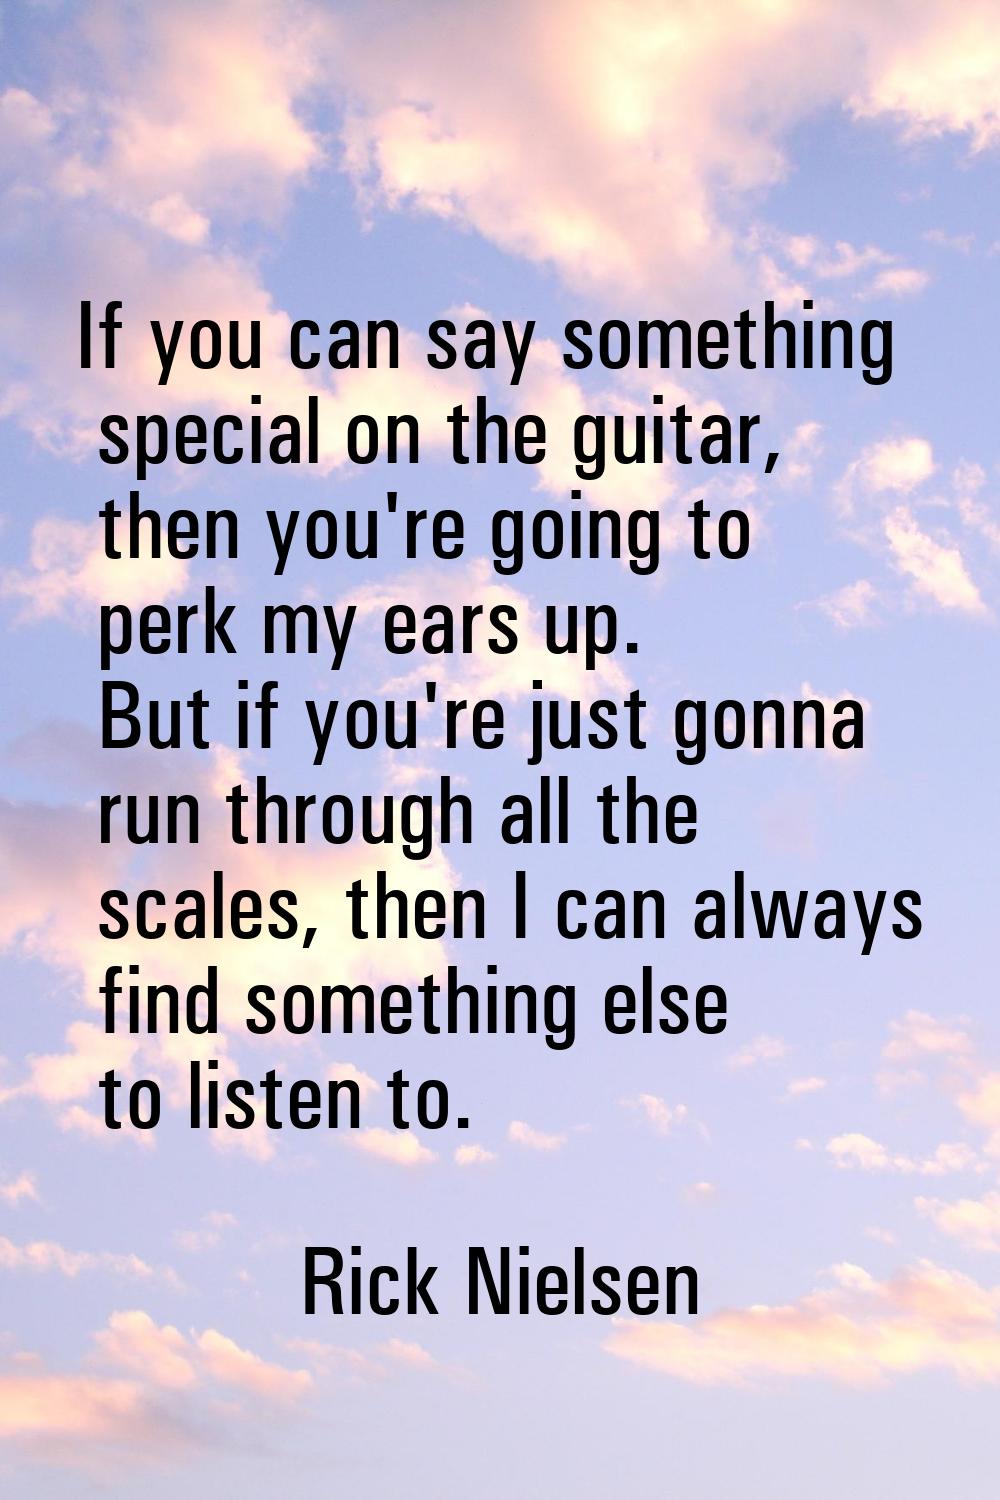 If you can say something special on the guitar, then you're going to perk my ears up. But if you're